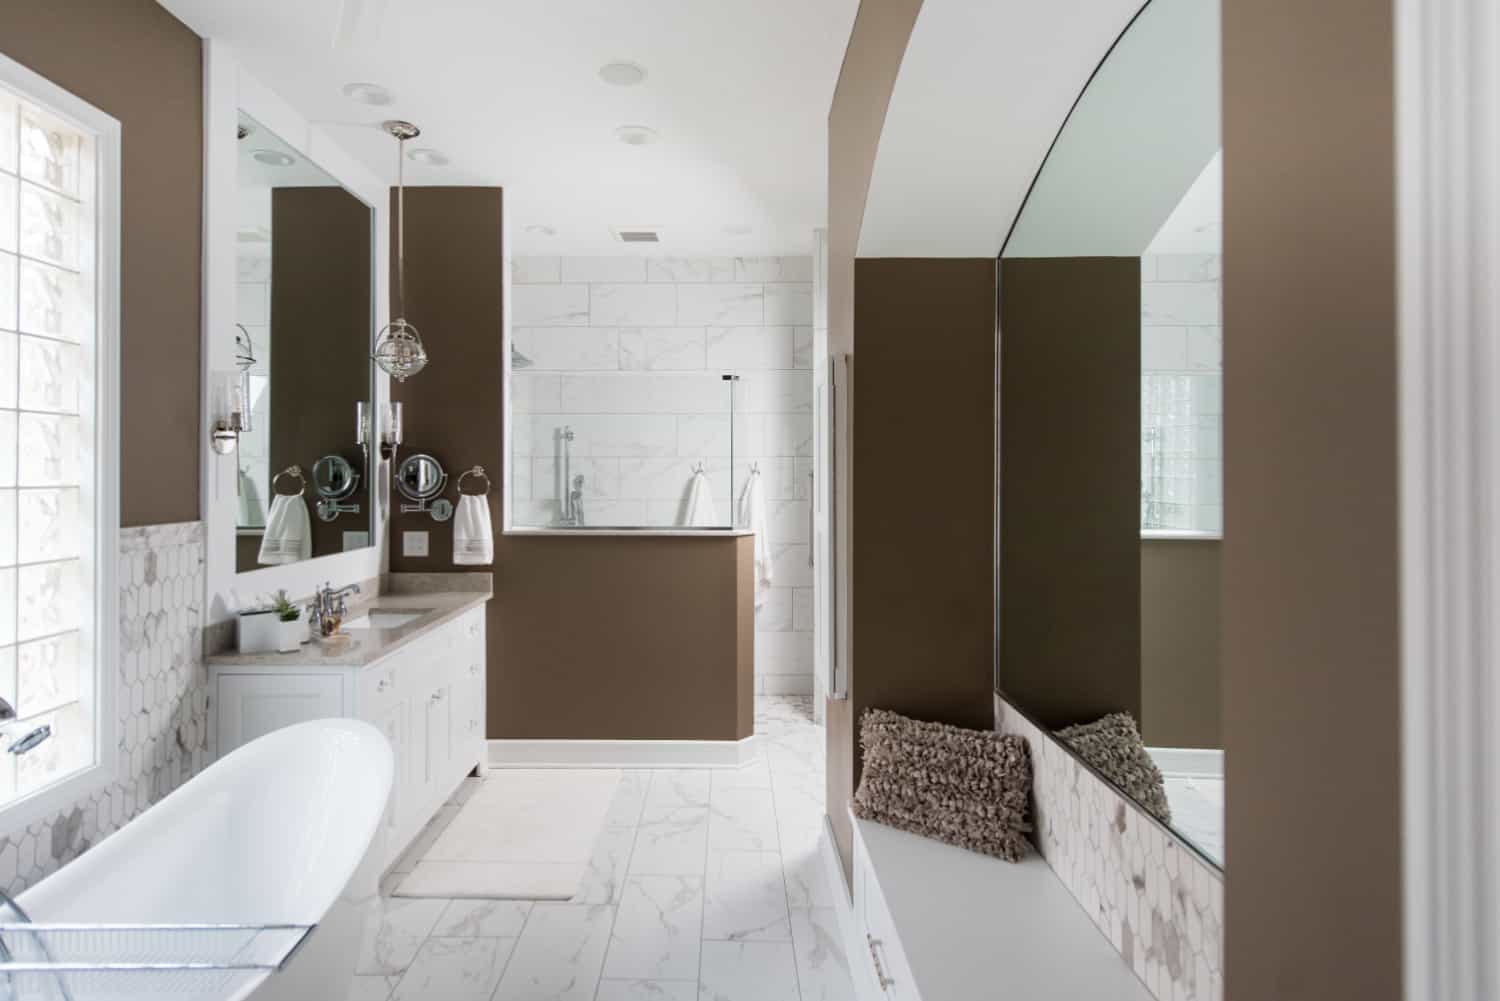 Nicholas Design Build | A bathroom oasis with brown walls and a white tub.